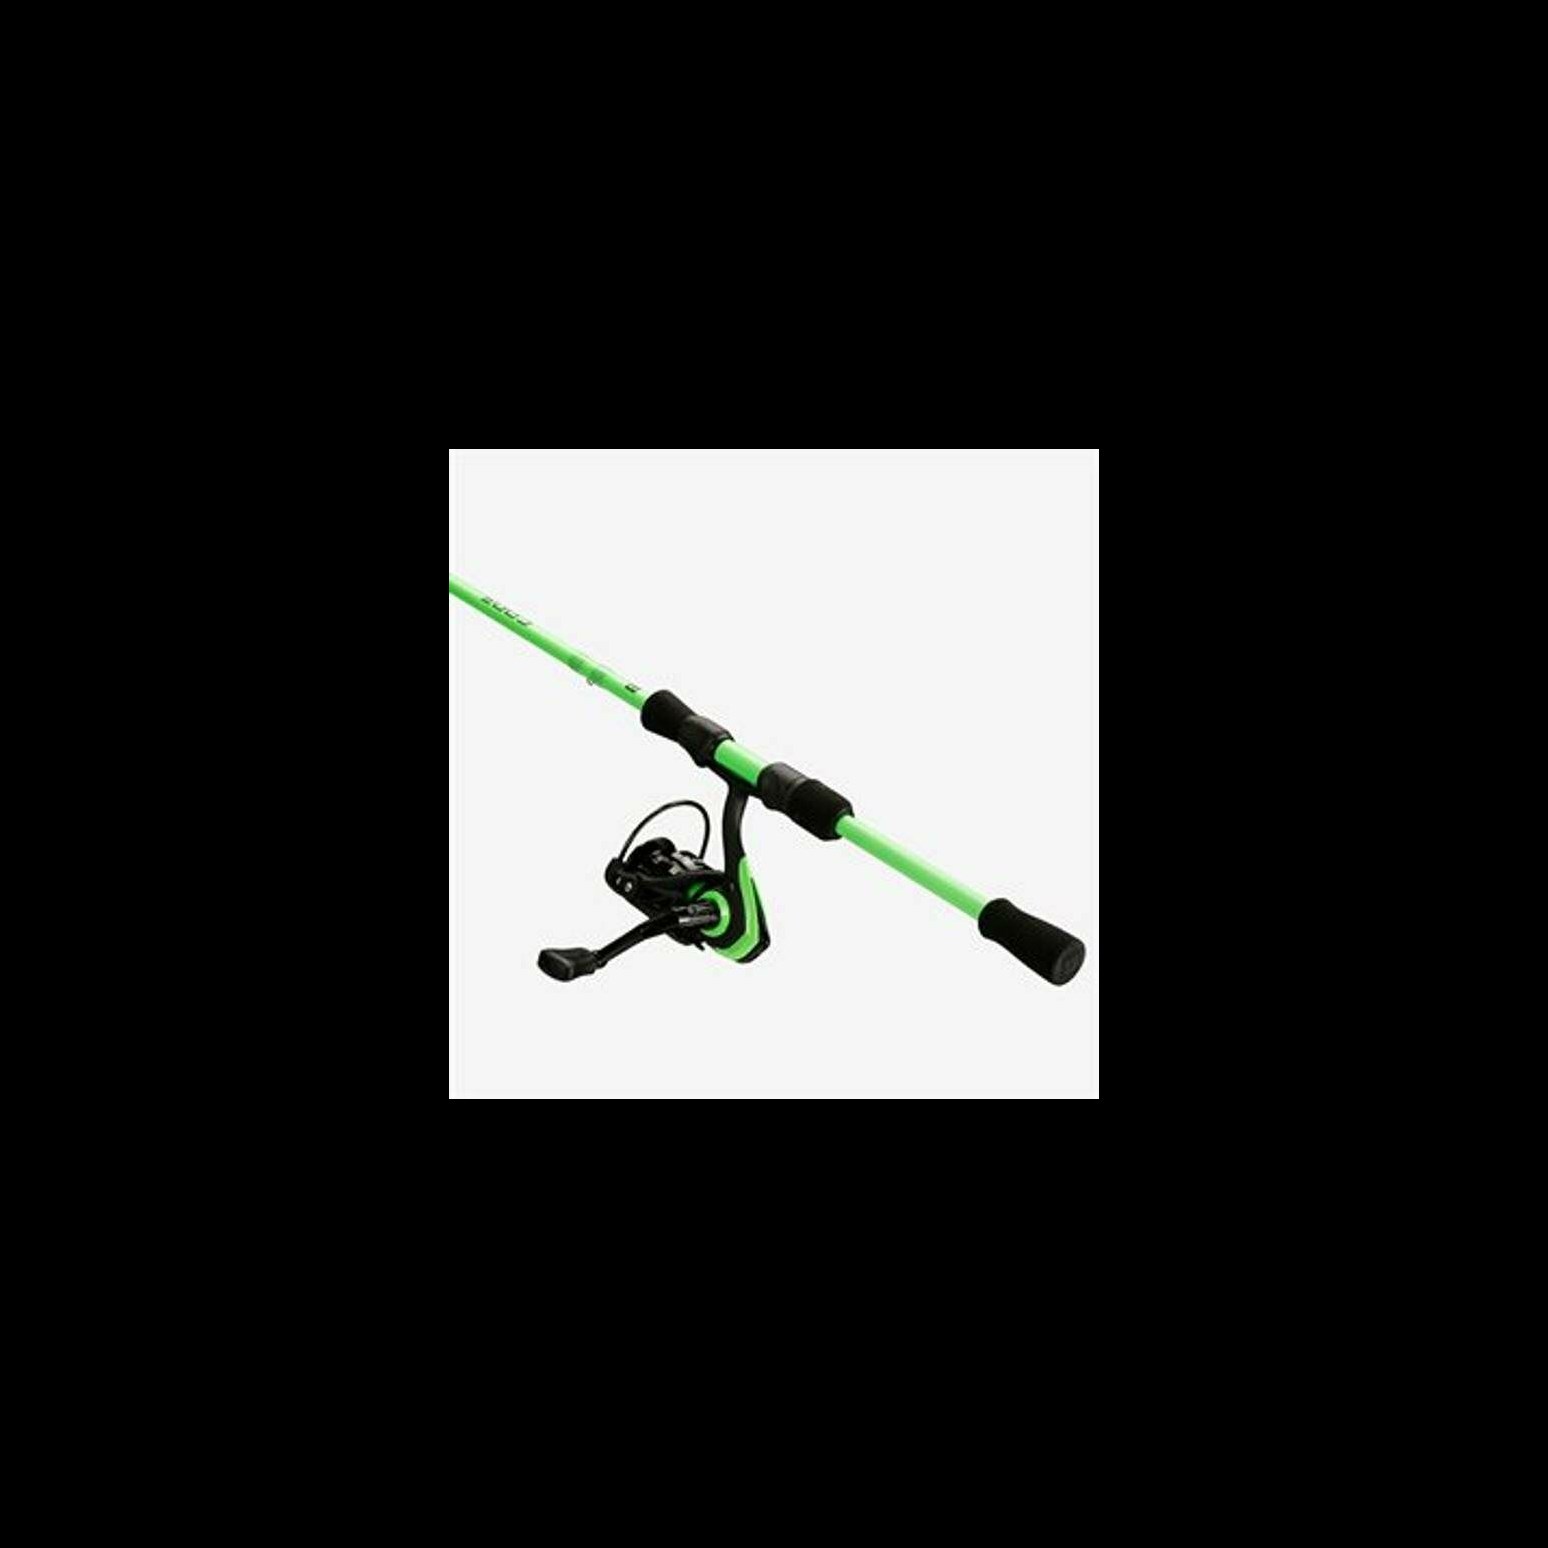 13 Fishing Code Neon 6 ft 7 in MH Freshwater Spinning Combo 2 pc 